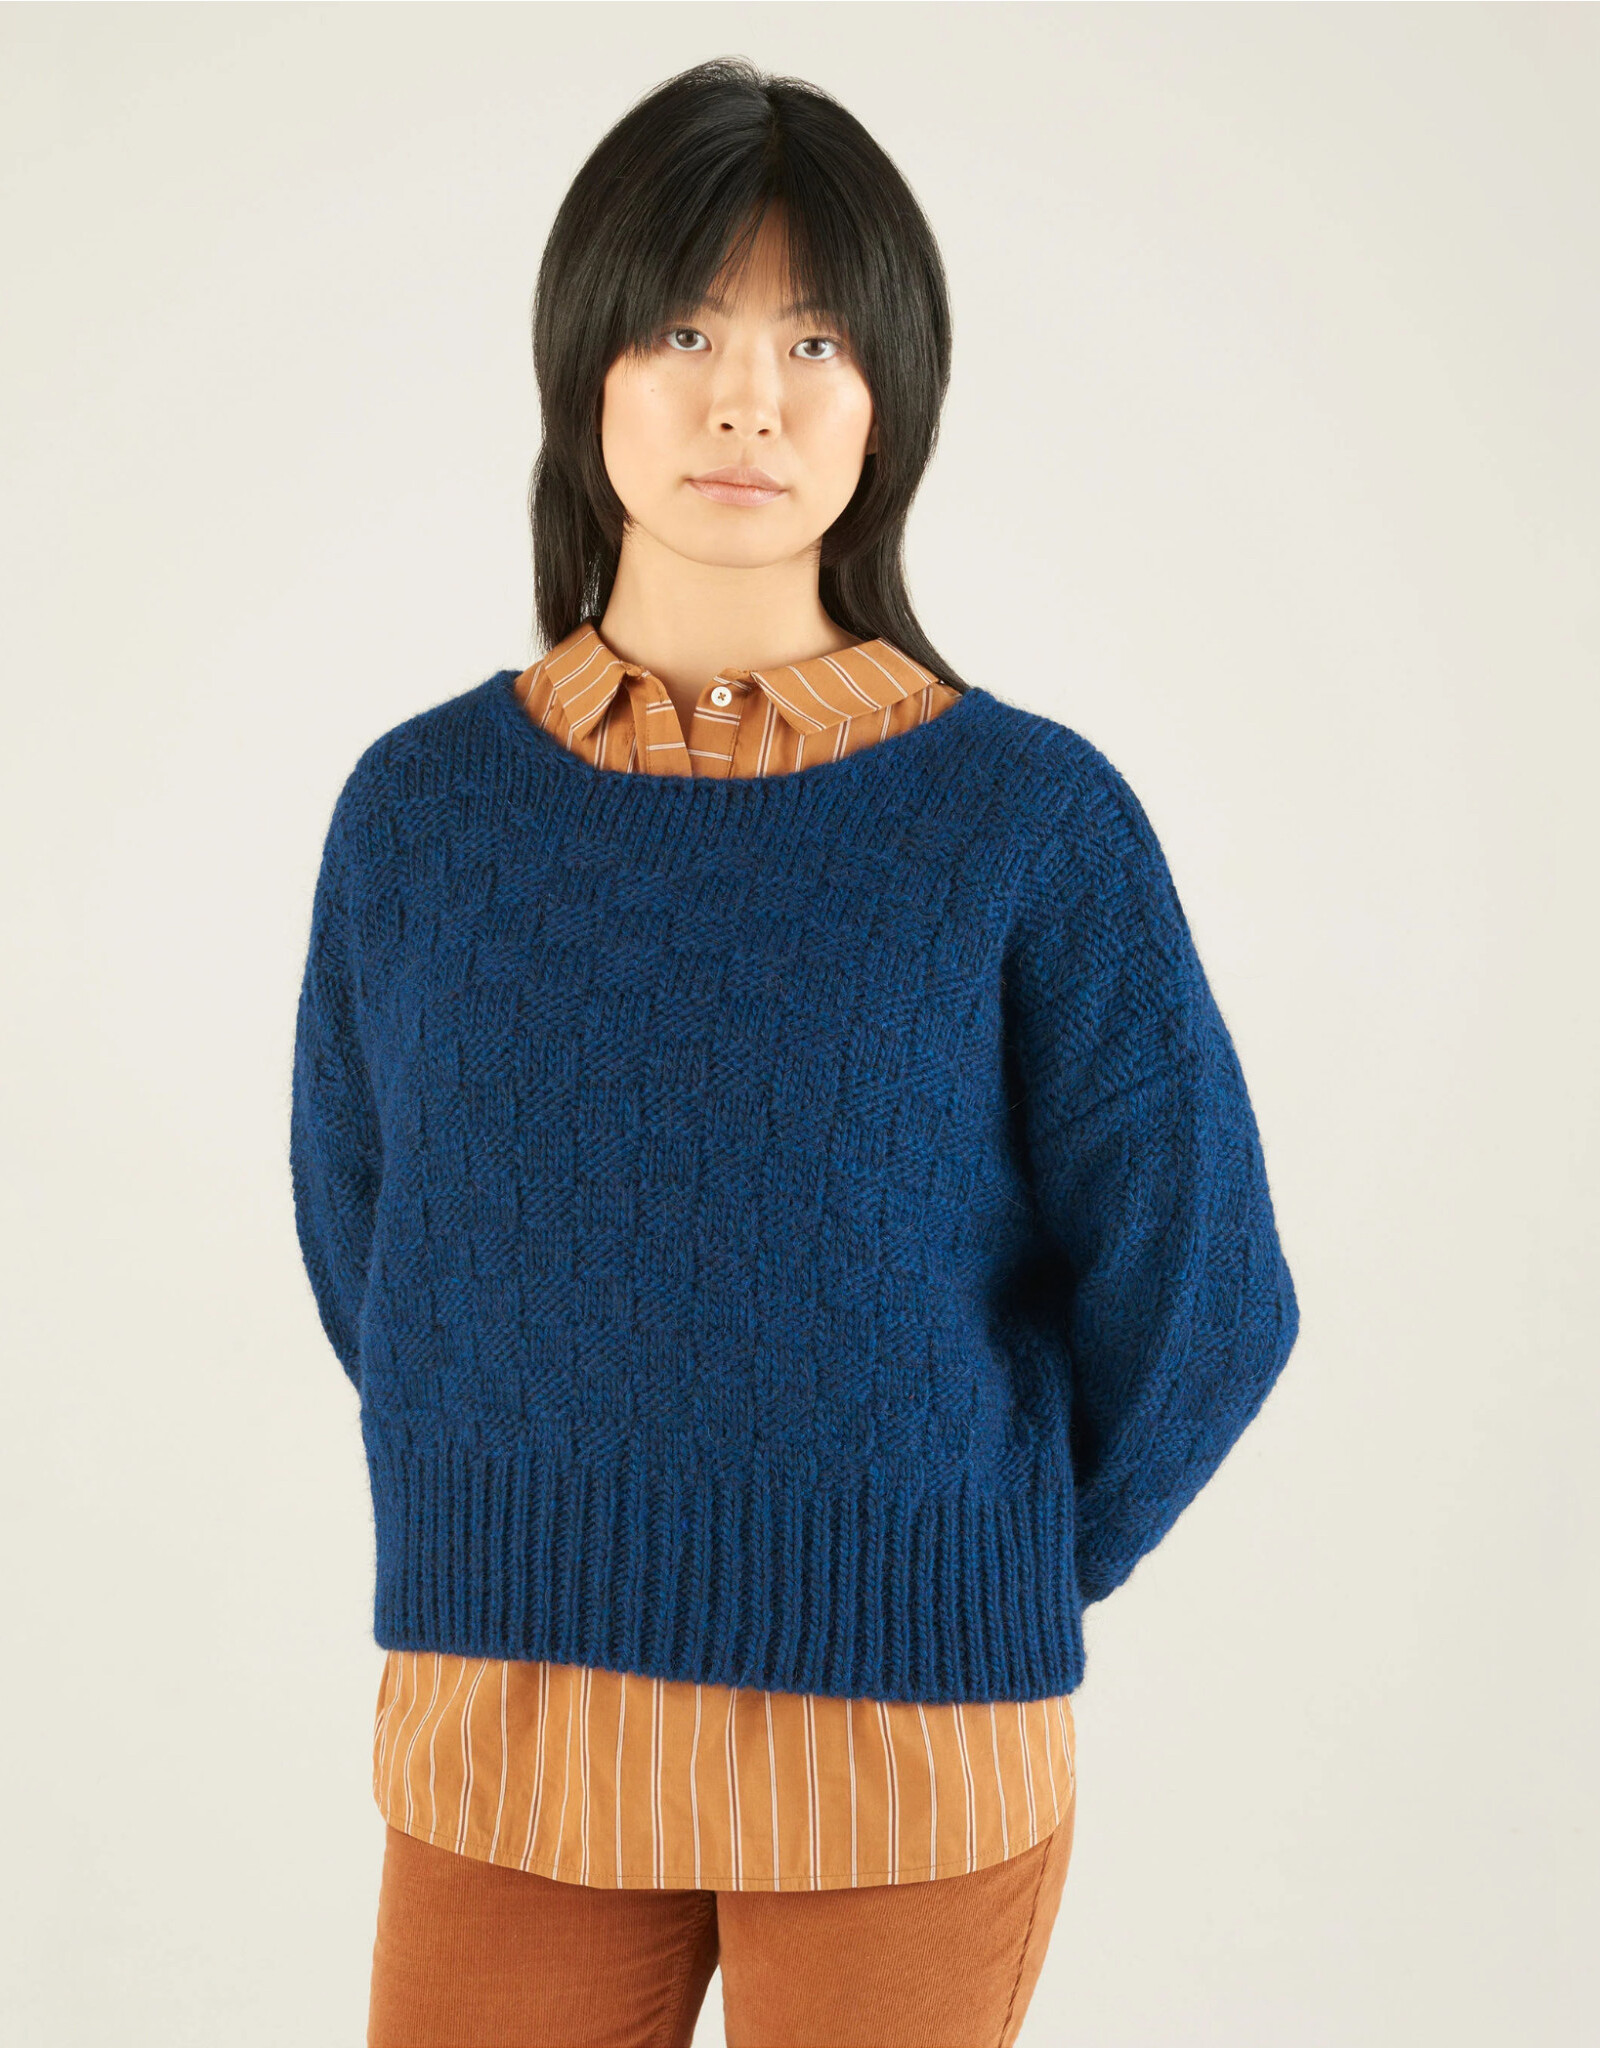 Cotélac Ines Pullover Sweater